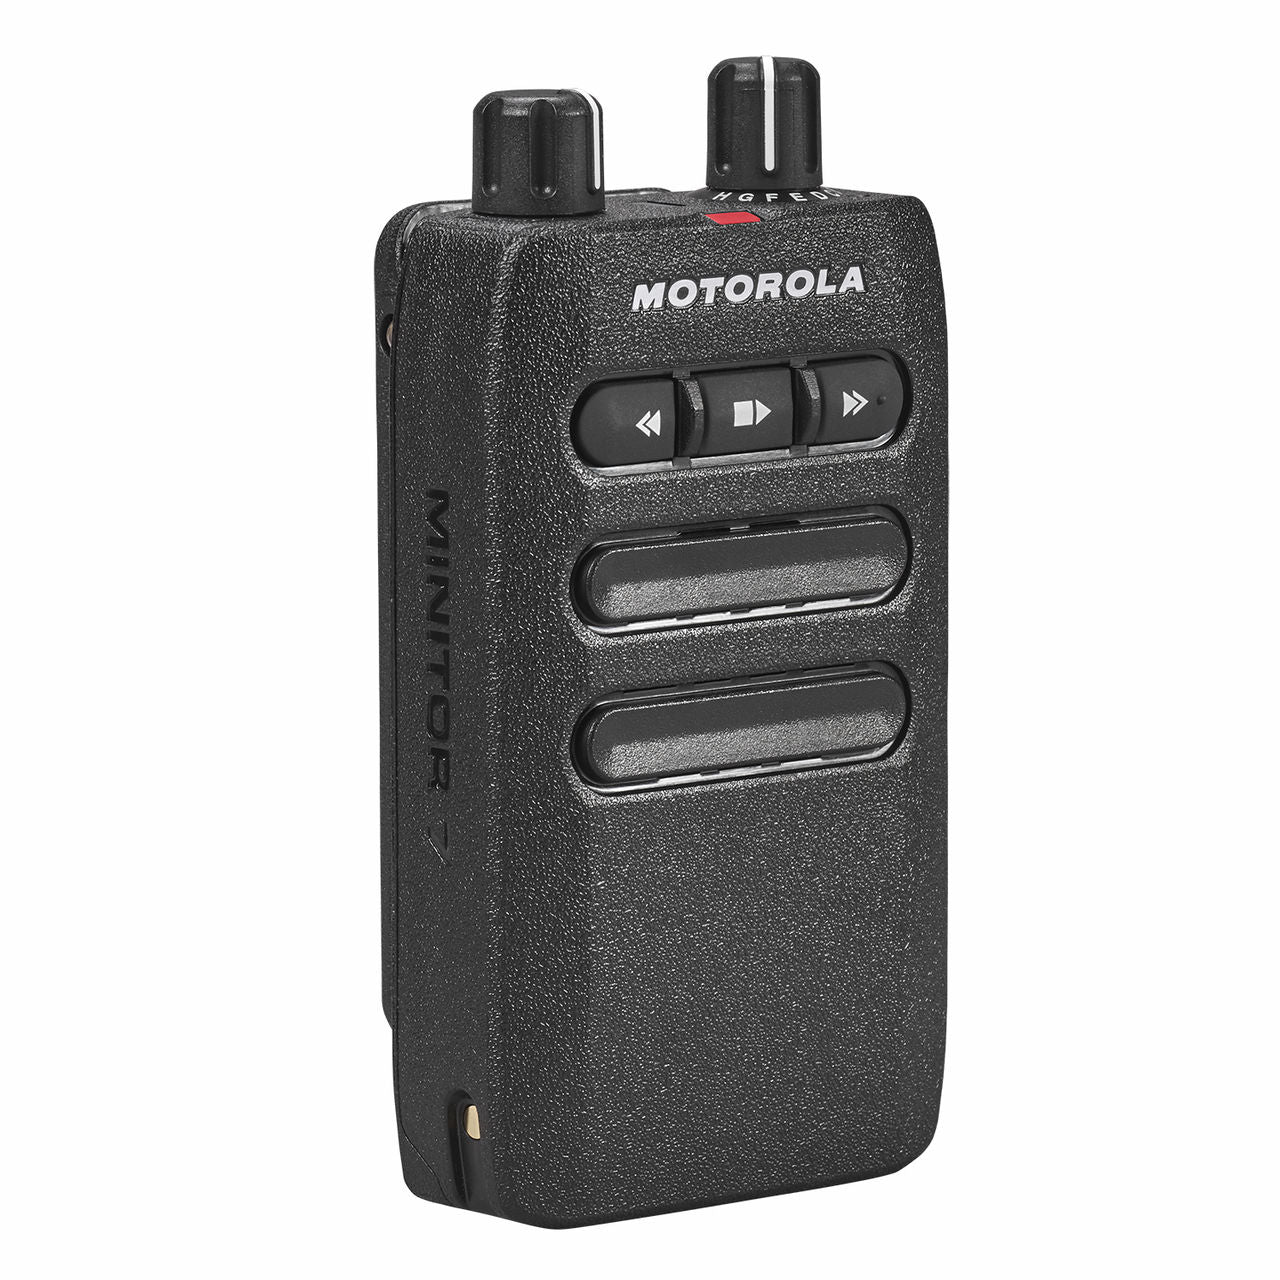 Motorola MINITOR 7 Voice Pager, 5 Channel IS - VHF 143-174 Mhz